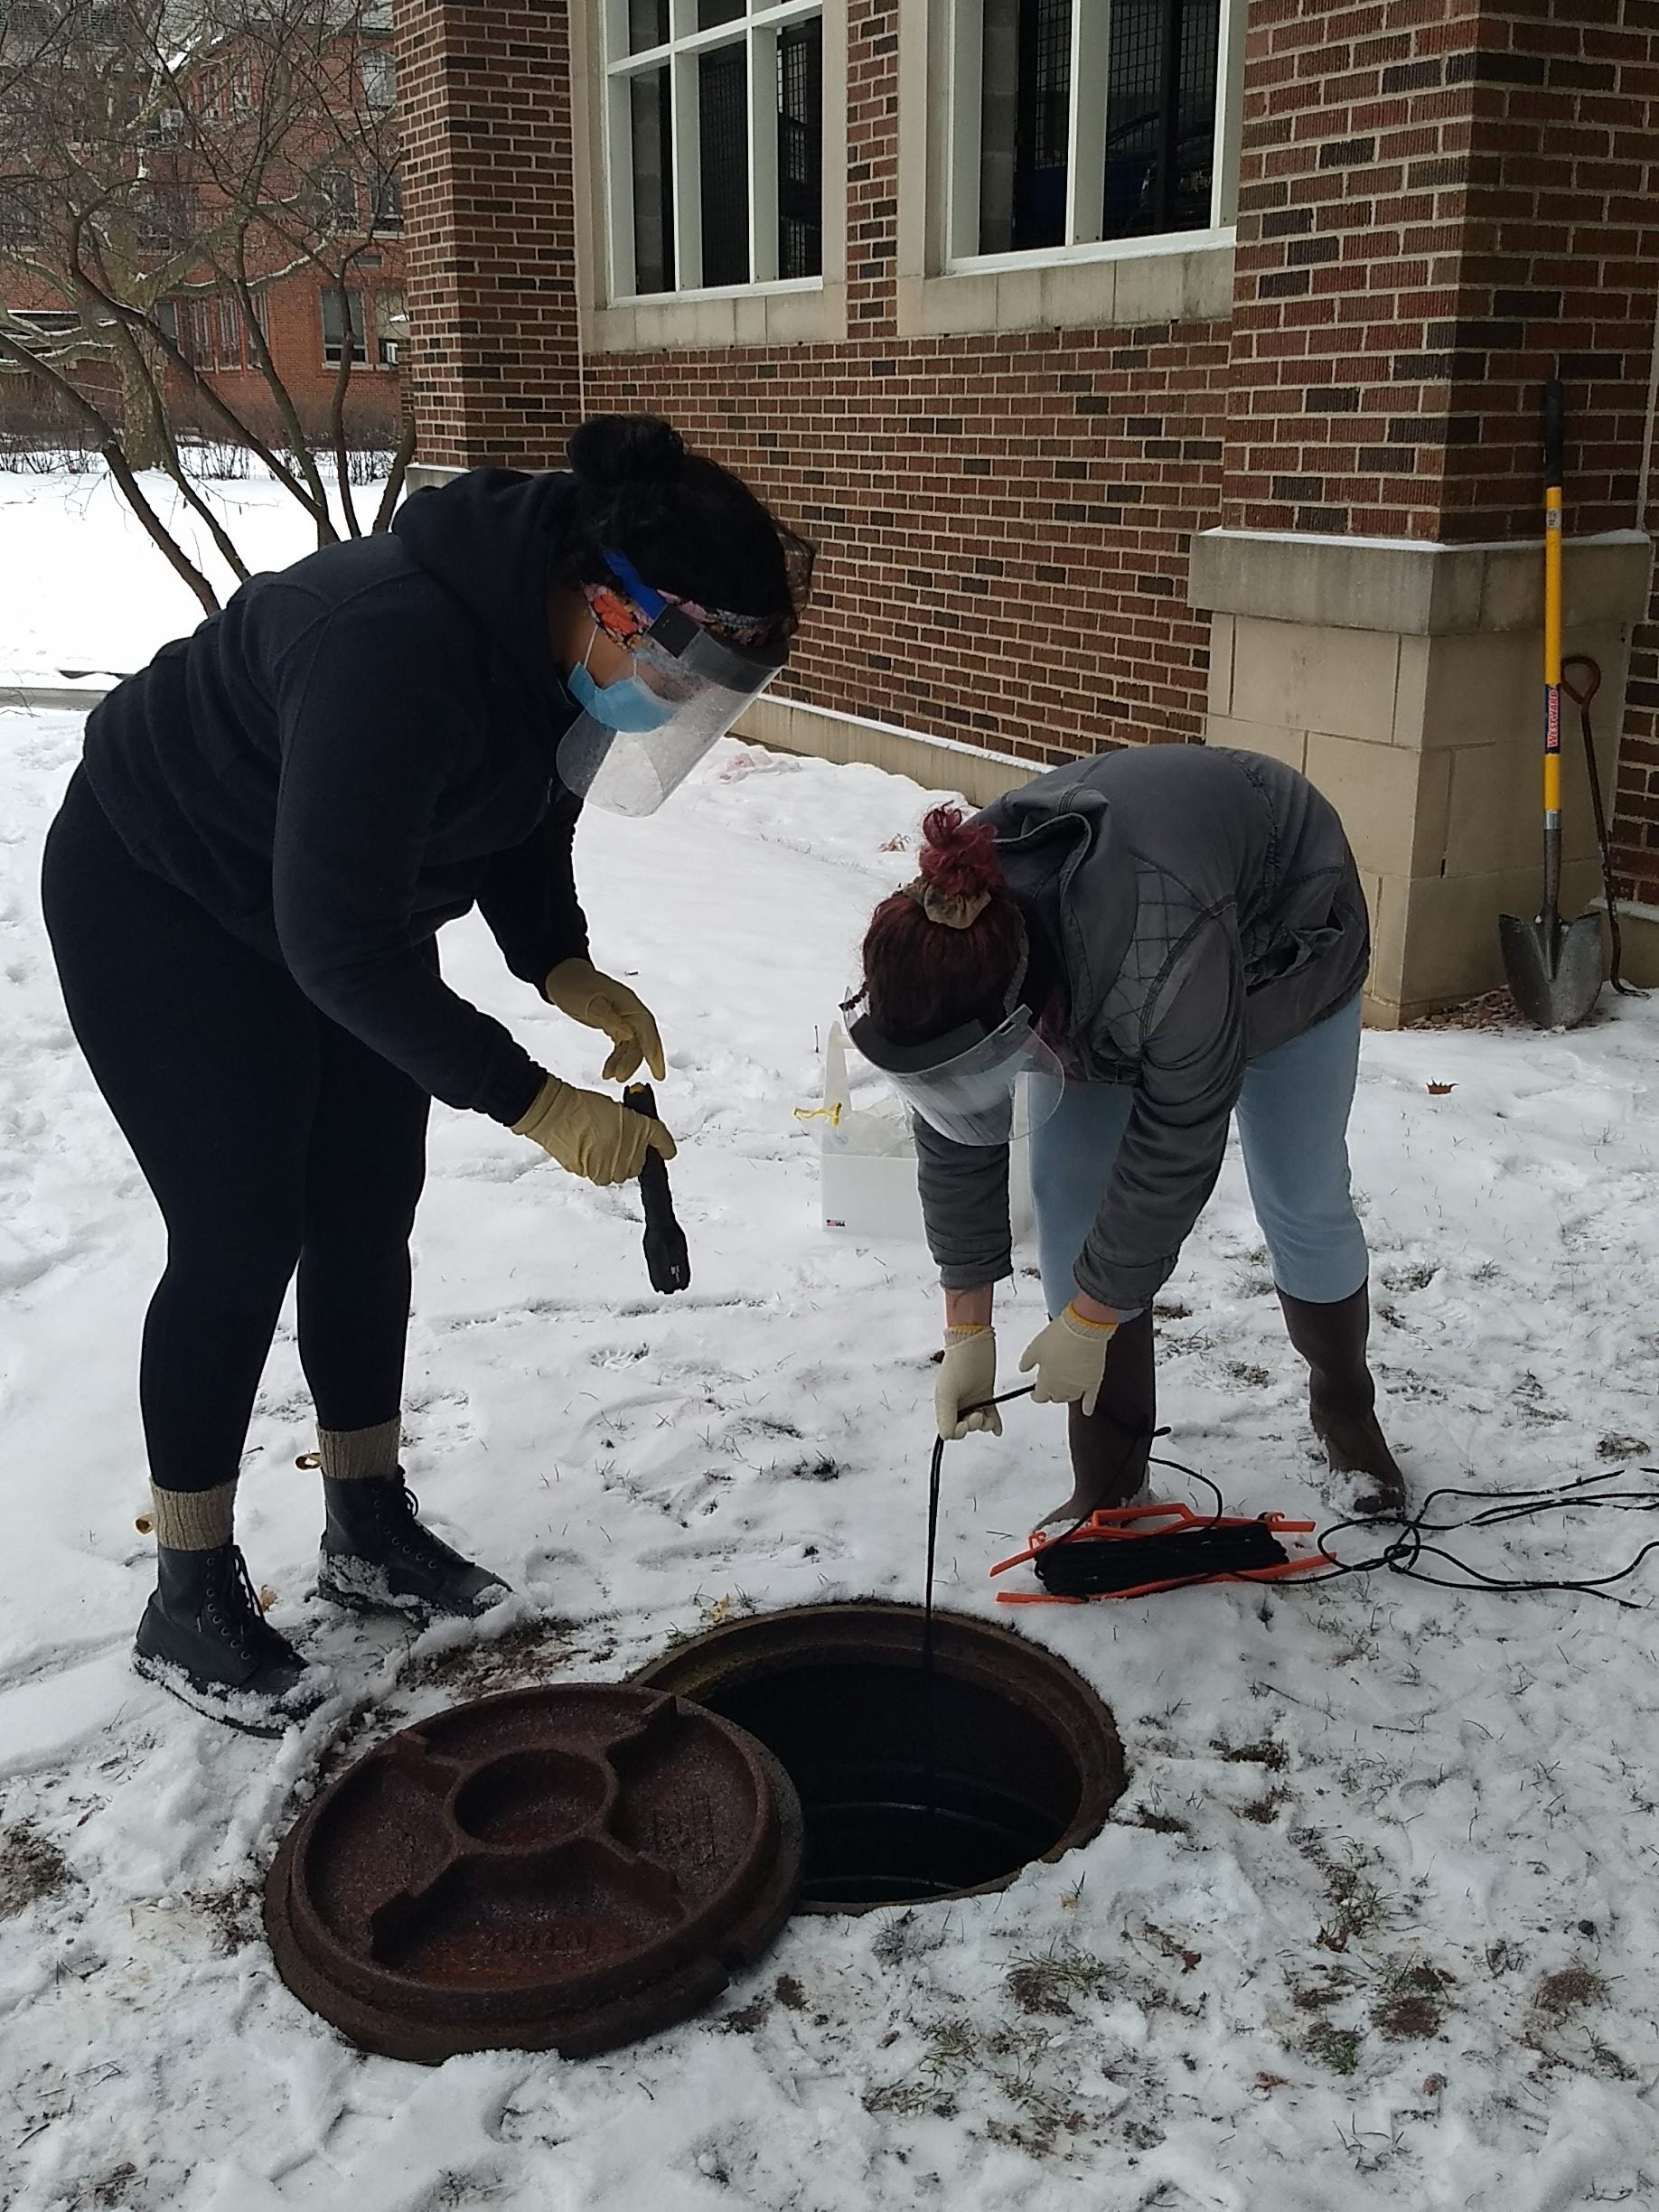 Students taking samples in the winter